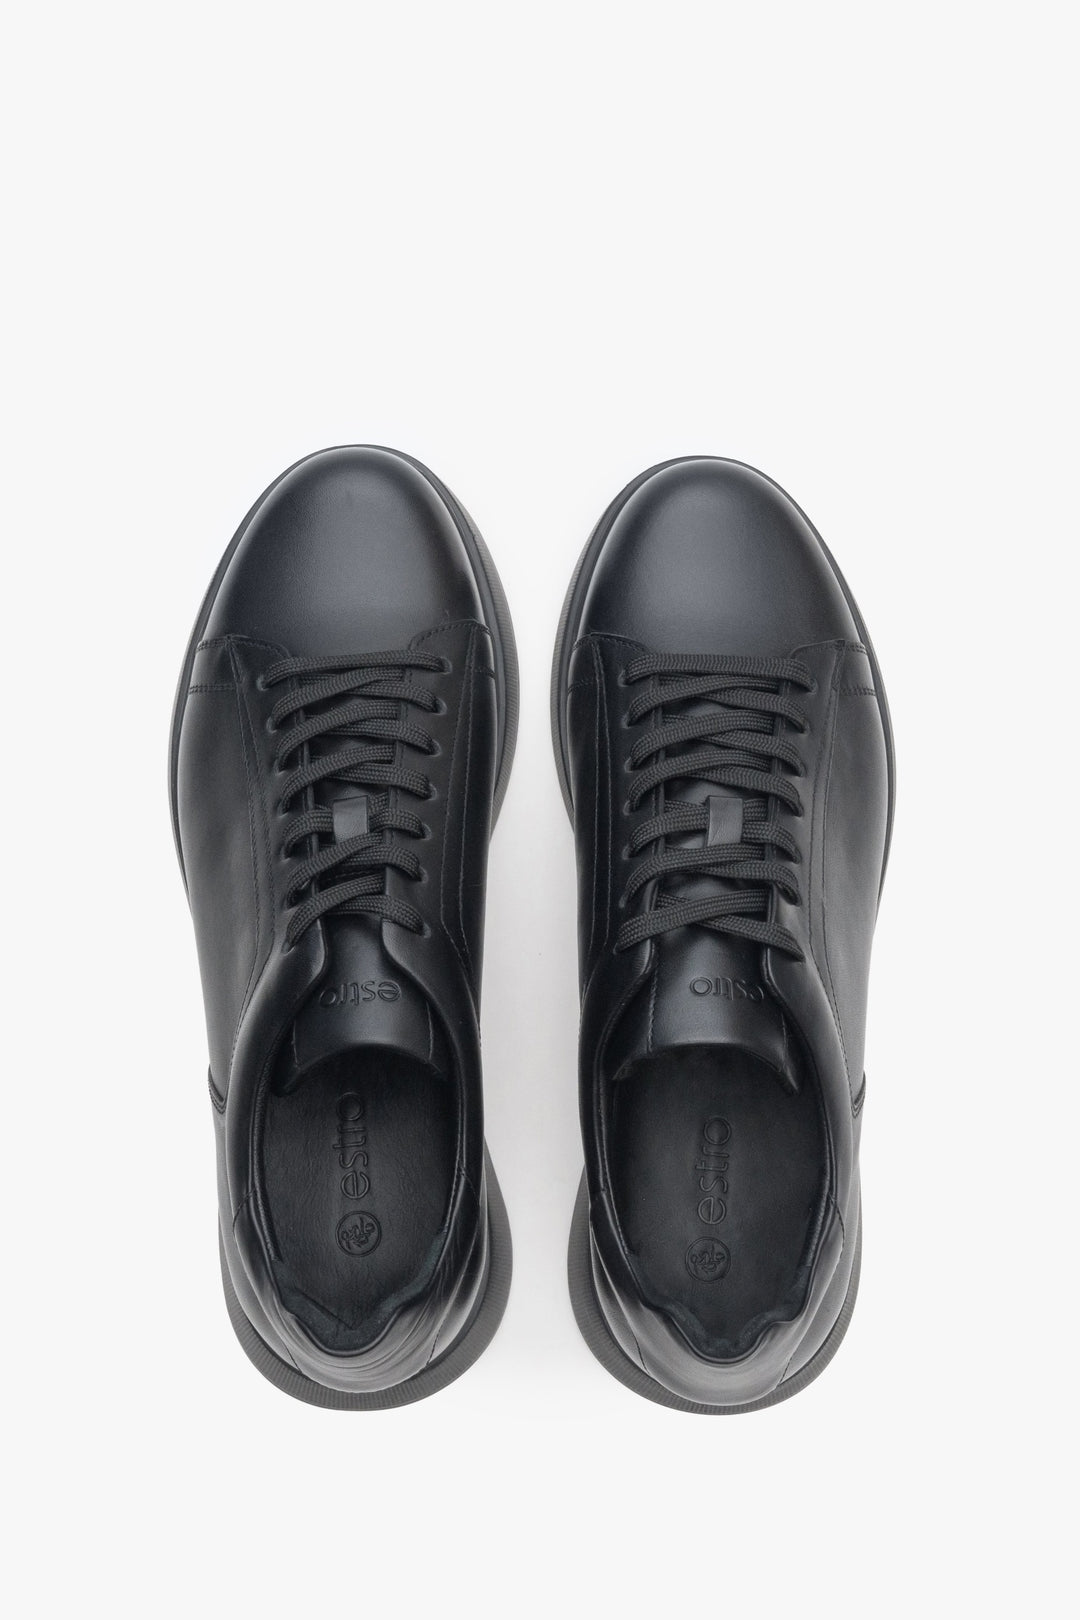 Men's low top sneakers with lacing in black genuine leather by Estro - top view presentation of the model.